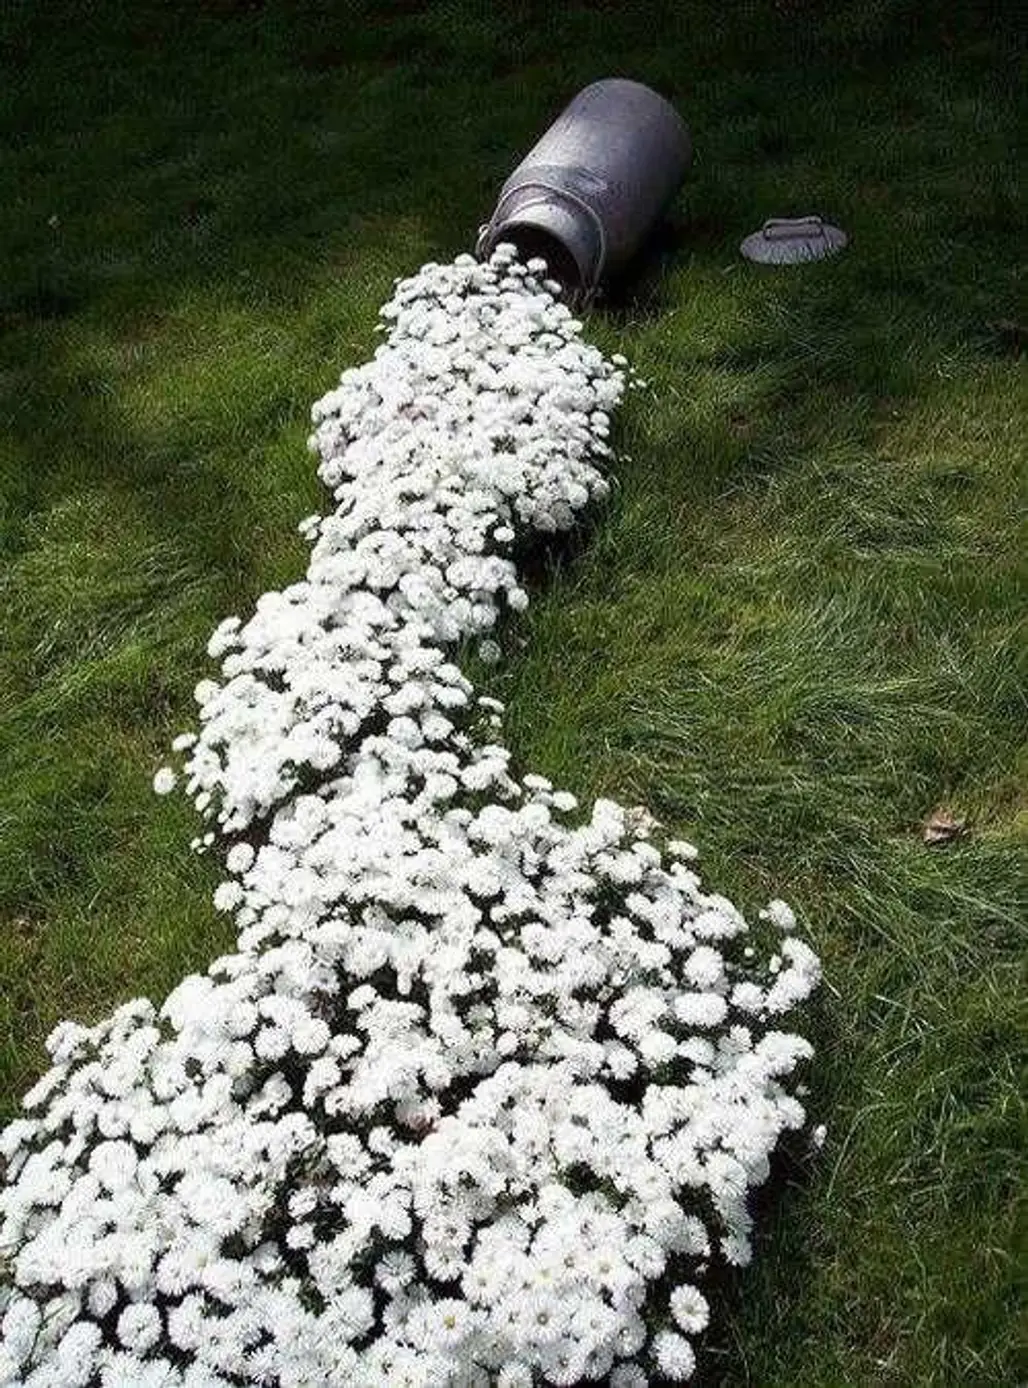 Spilled Flowers